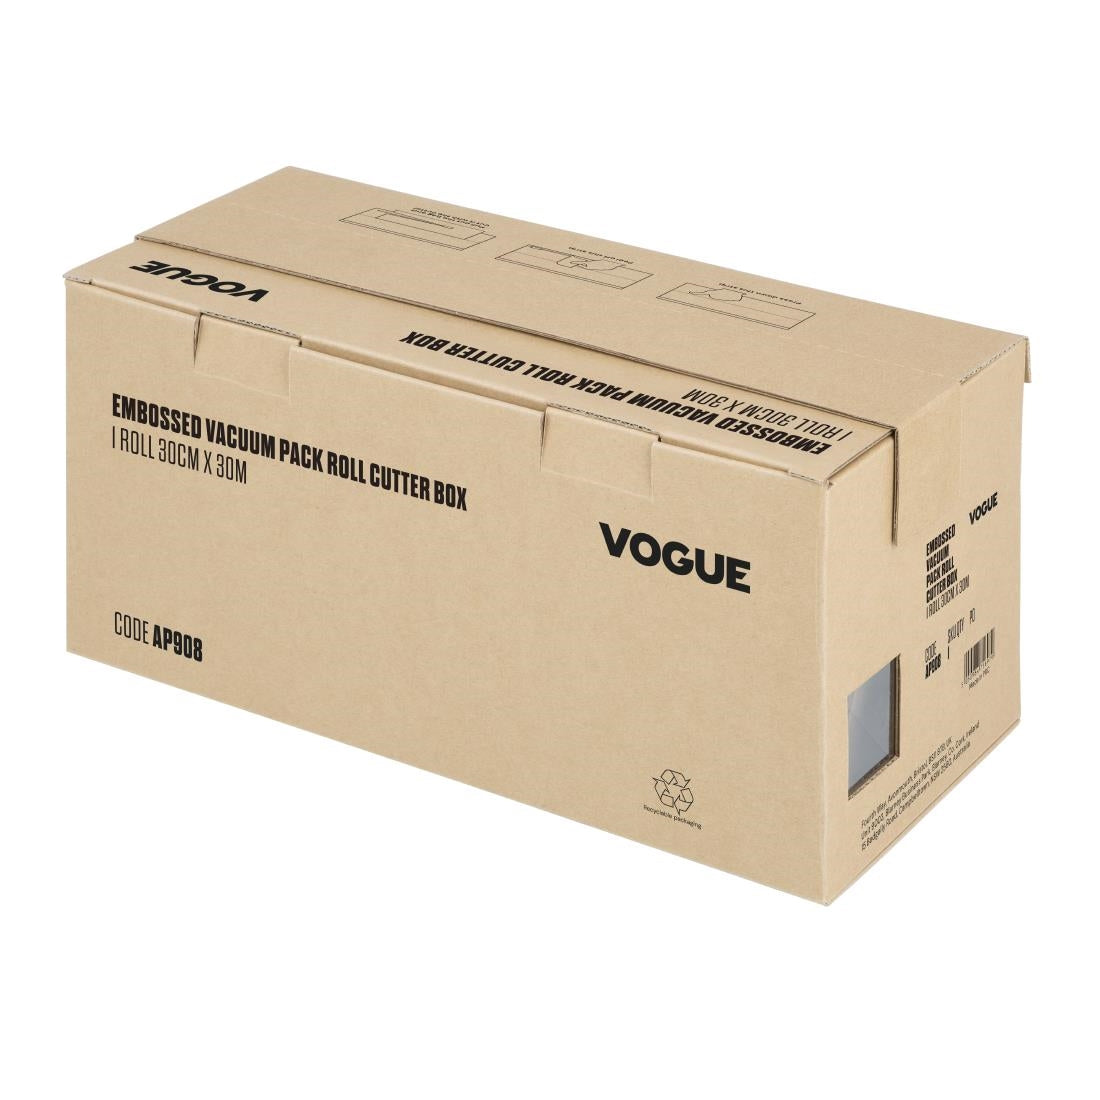 AP908 Vogue Vacuum Pack Roll with Cutter Box (Embossed) 300mm width